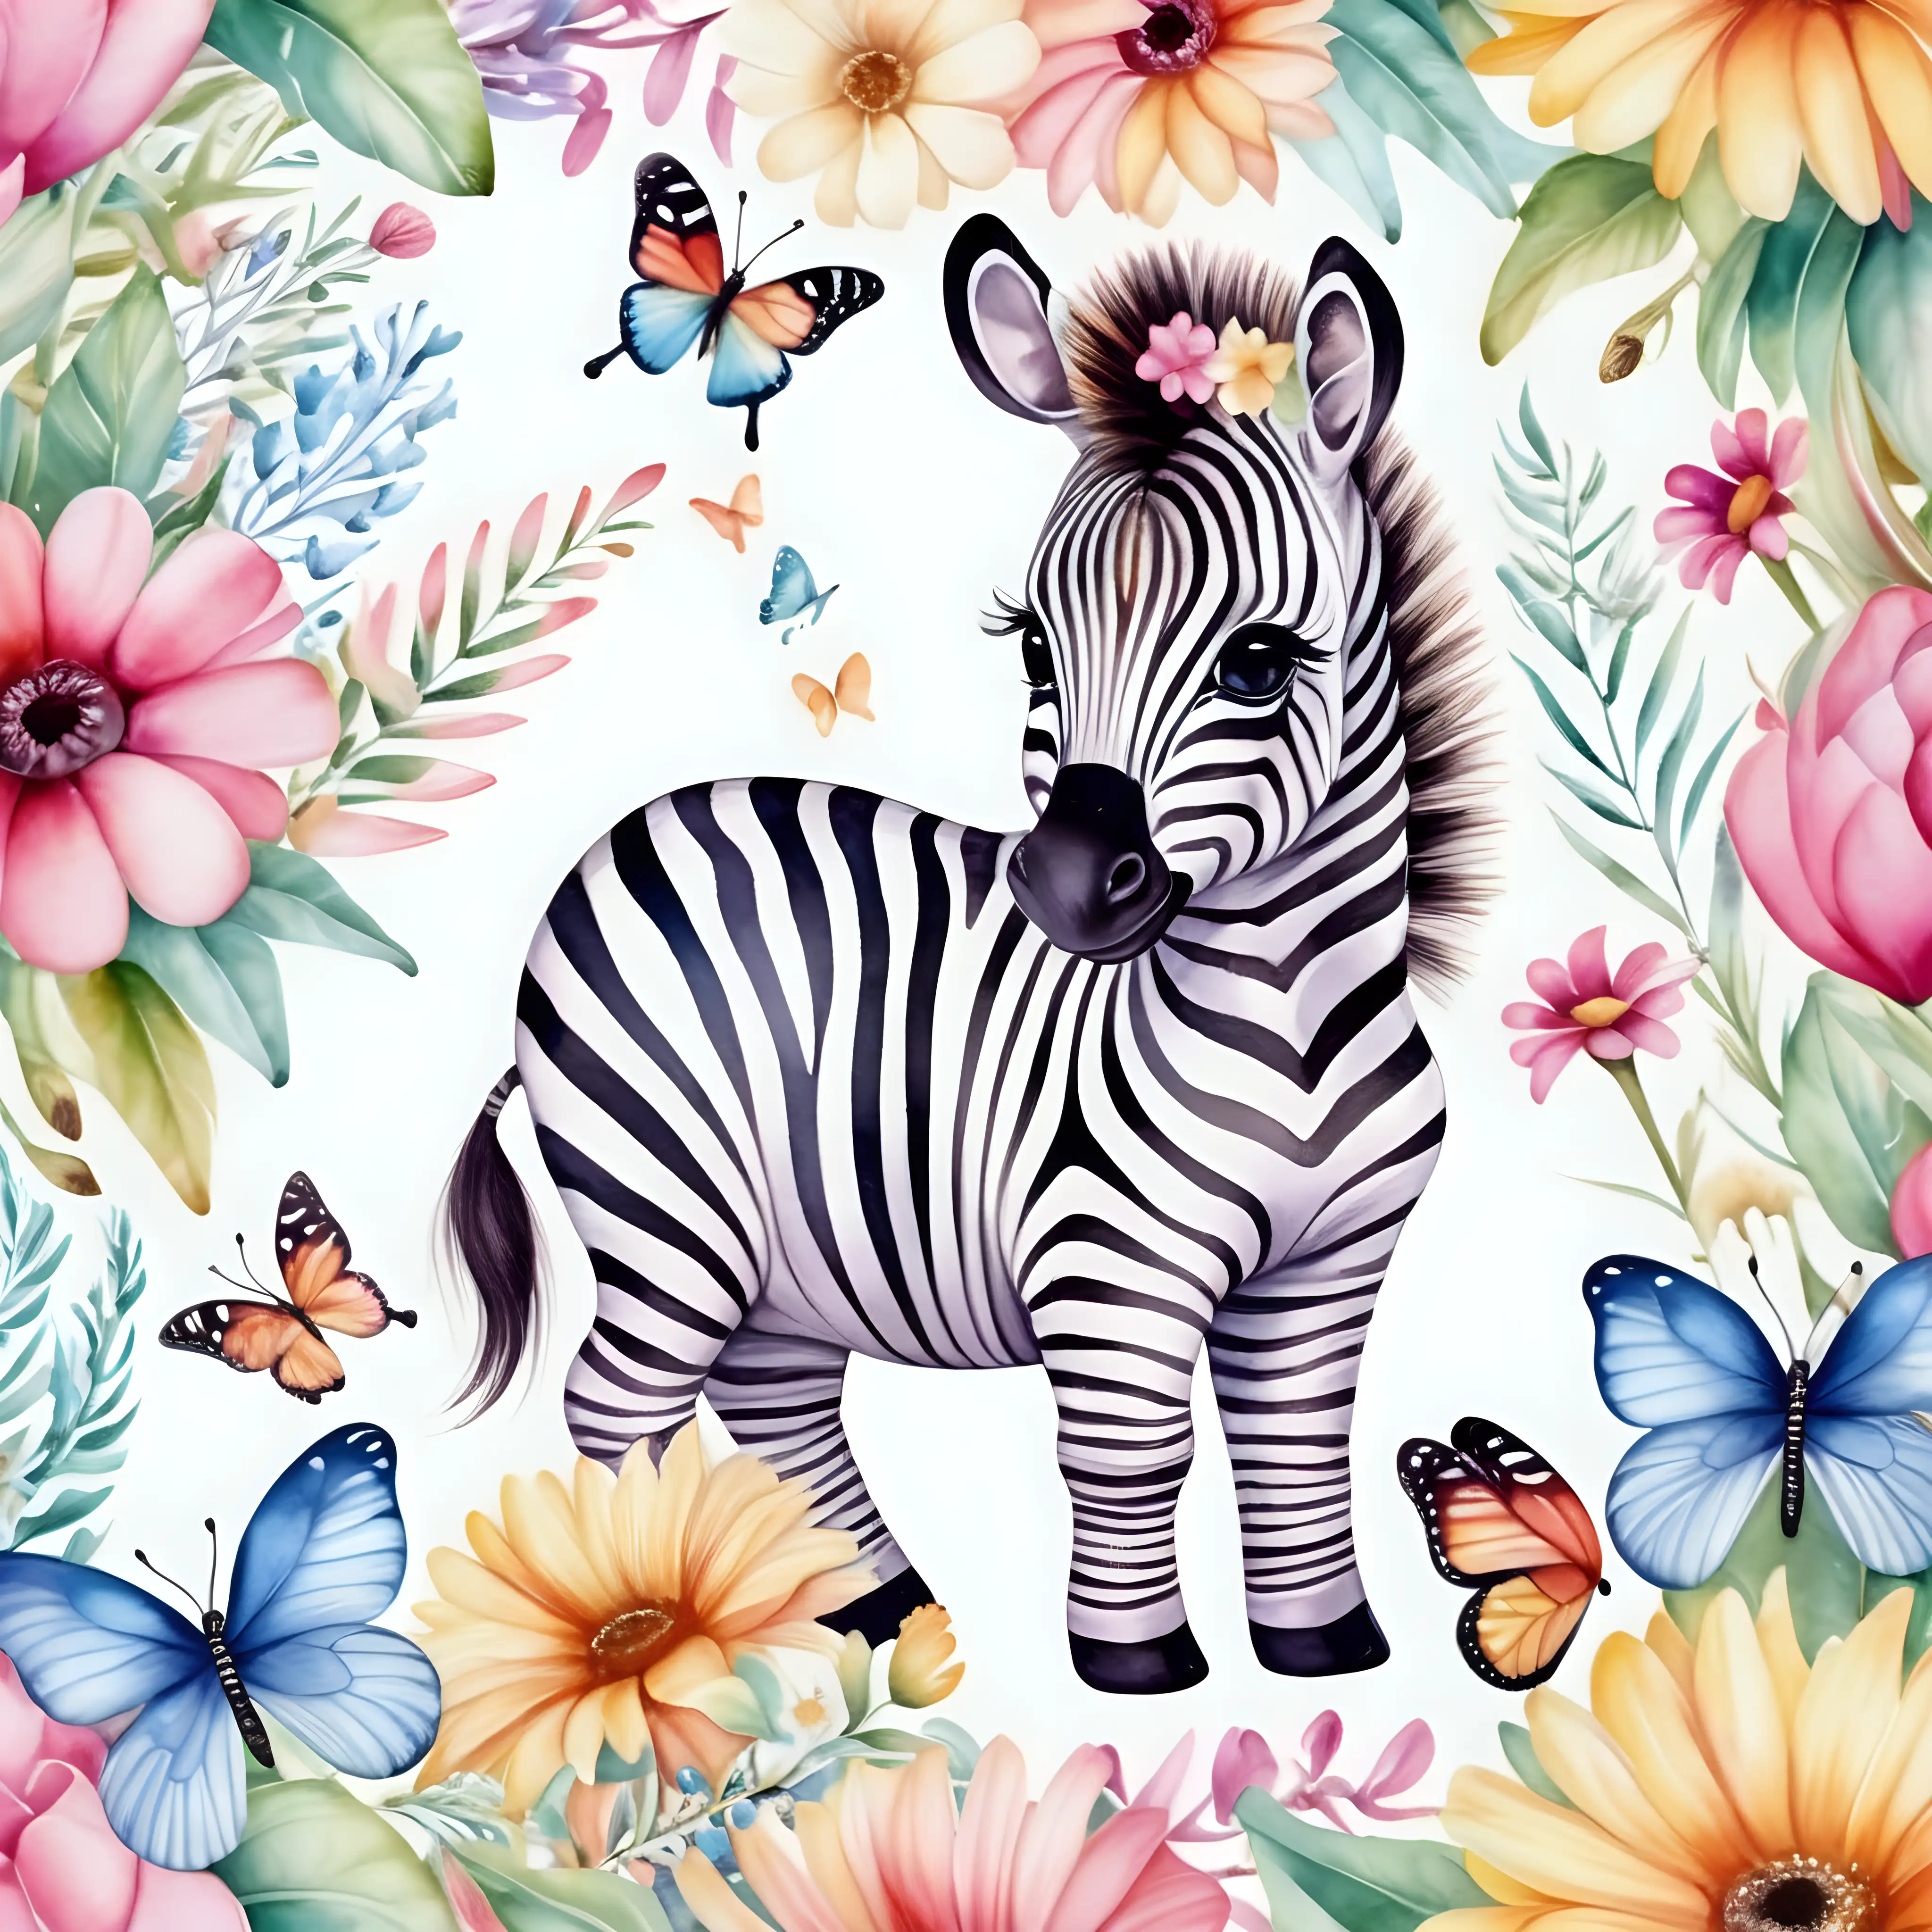 Vibrant Watercolor Painting of a Baby Zebra Surrounded by Flowers and Butterflies